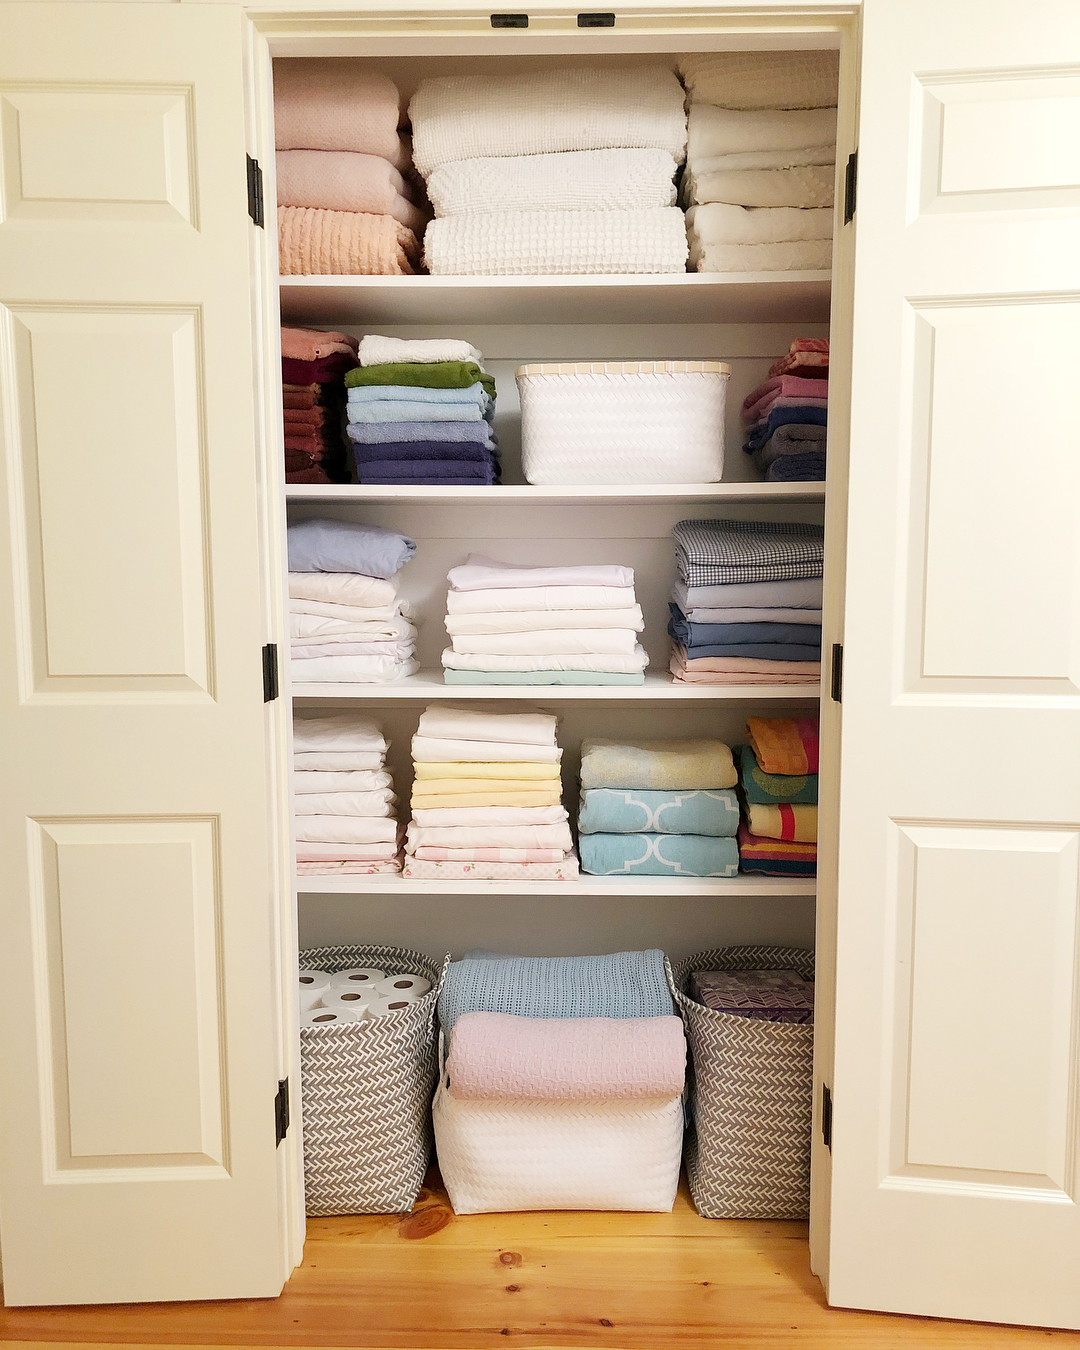 Towels Stored in Linen Closet. Photo by Instagram user @anorderedhome_shannon